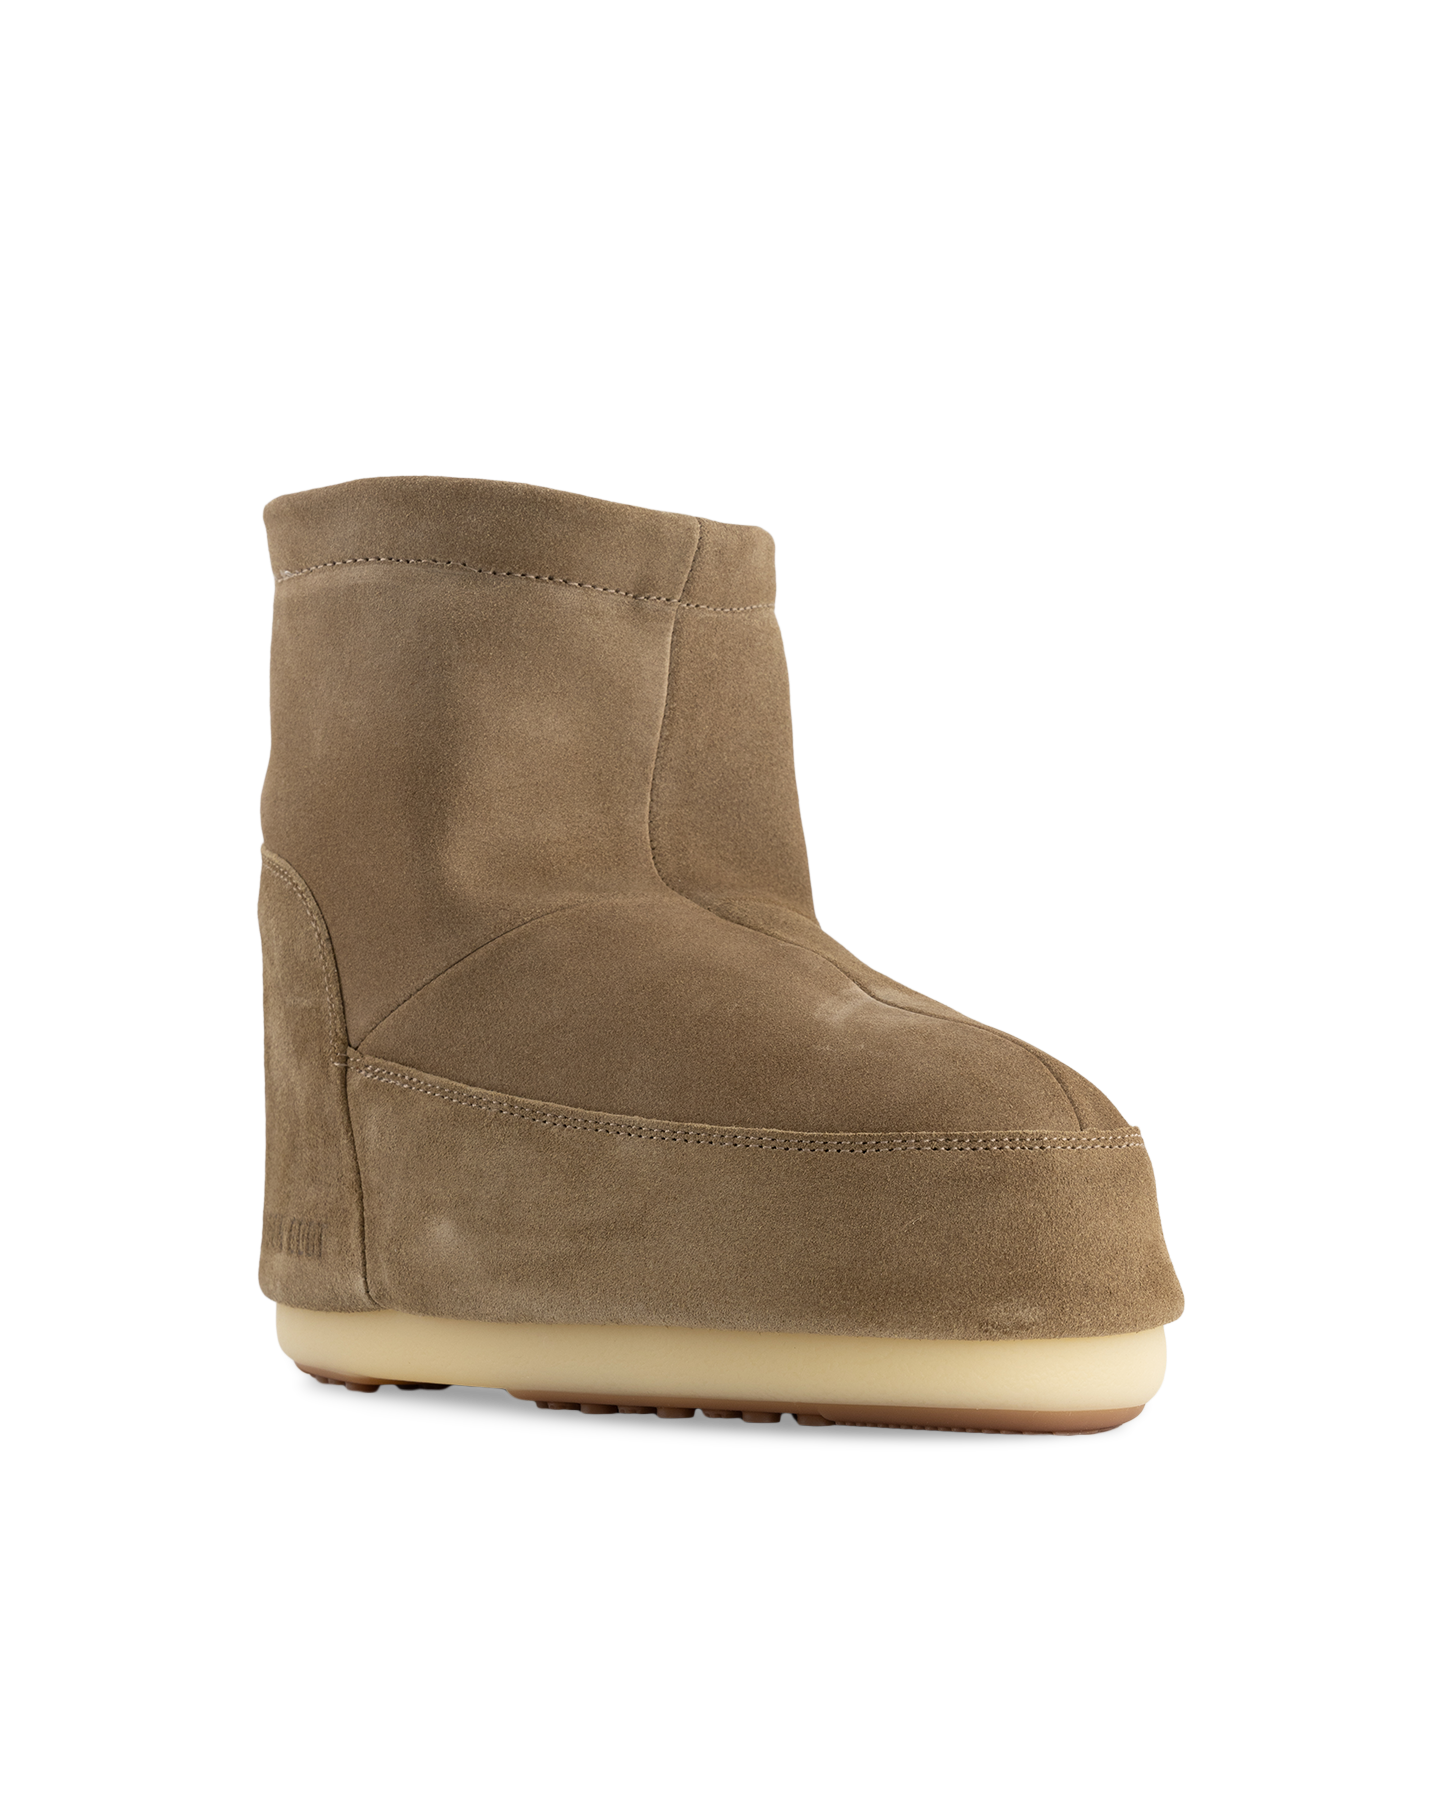 Moonboot Mb Icon Low Nolace Suede ZAND 2